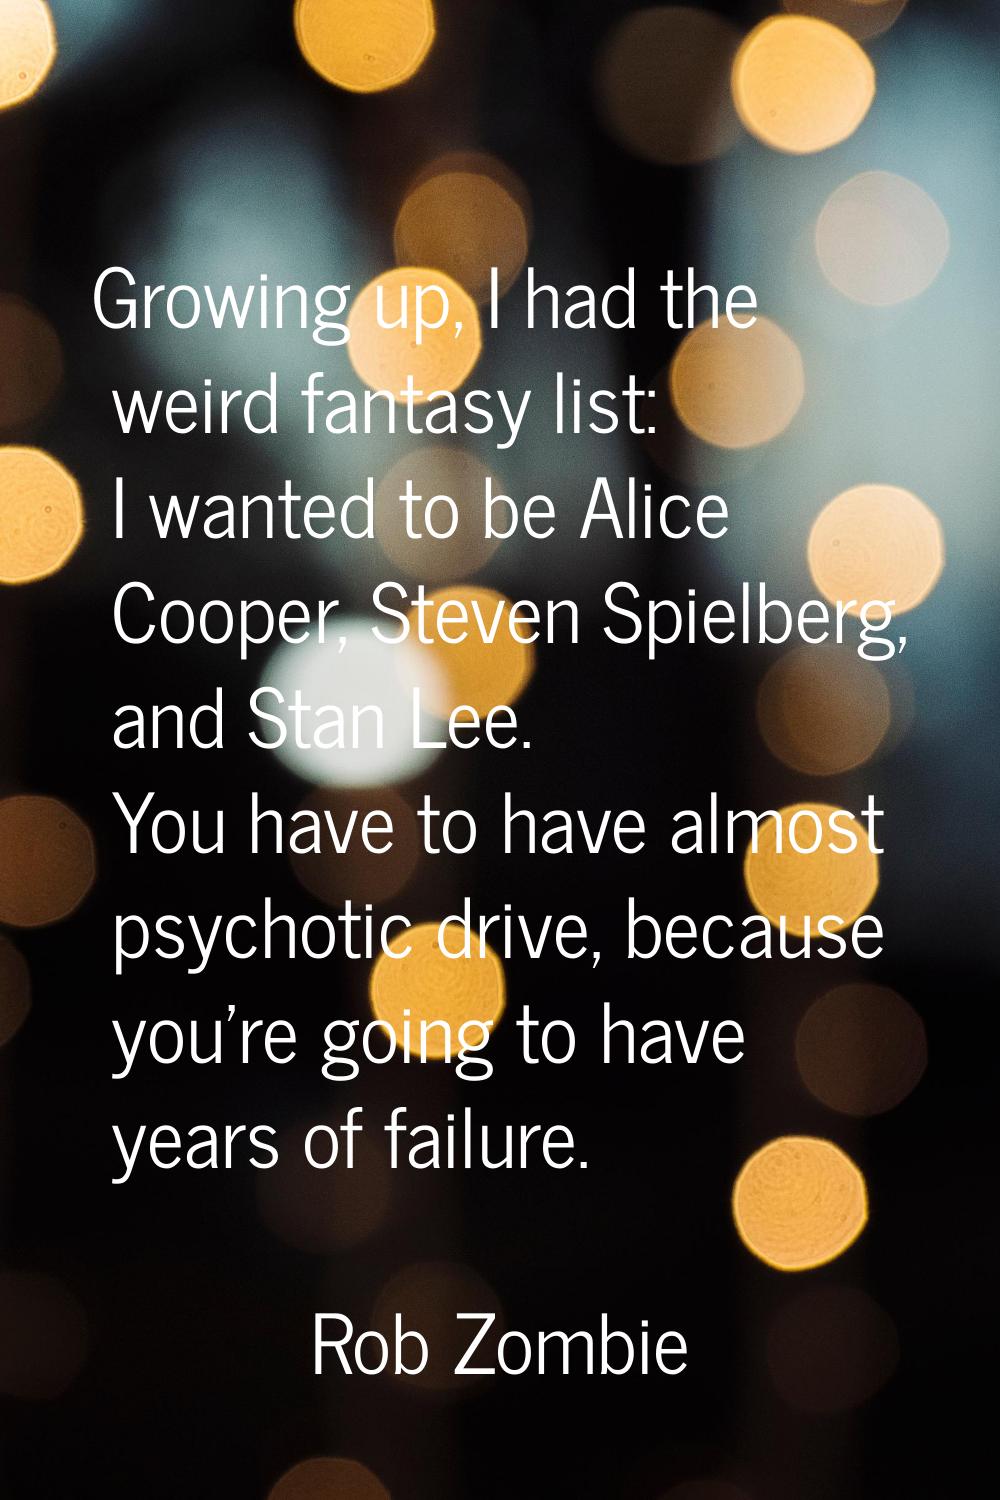 Growing up, I had the weird fantasy list: I wanted to be Alice Cooper, Steven Spielberg, and Stan L